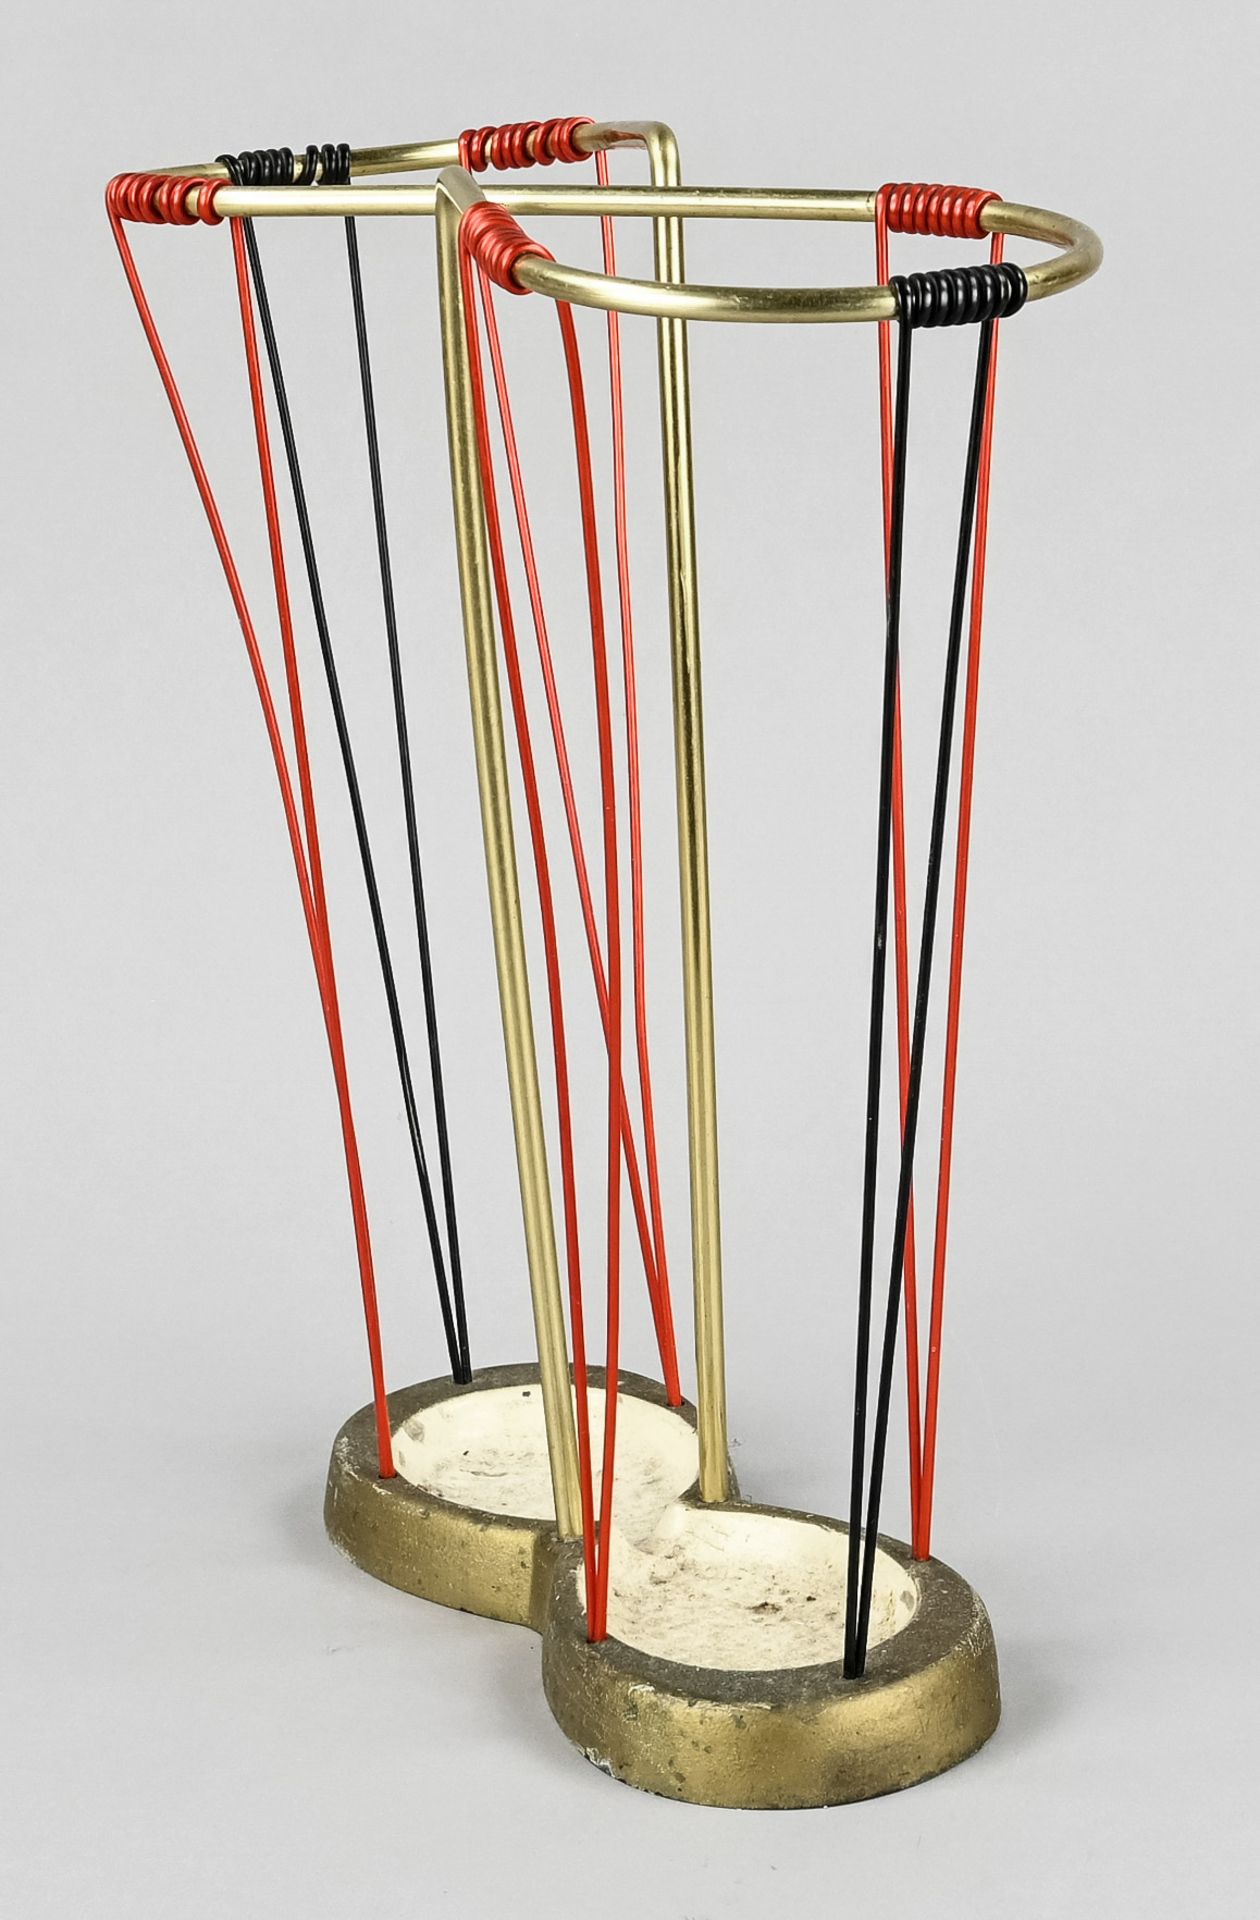 Umbrella stand, Germany c. 1950, metal, height 36 x 32 cm - Image 2 of 3